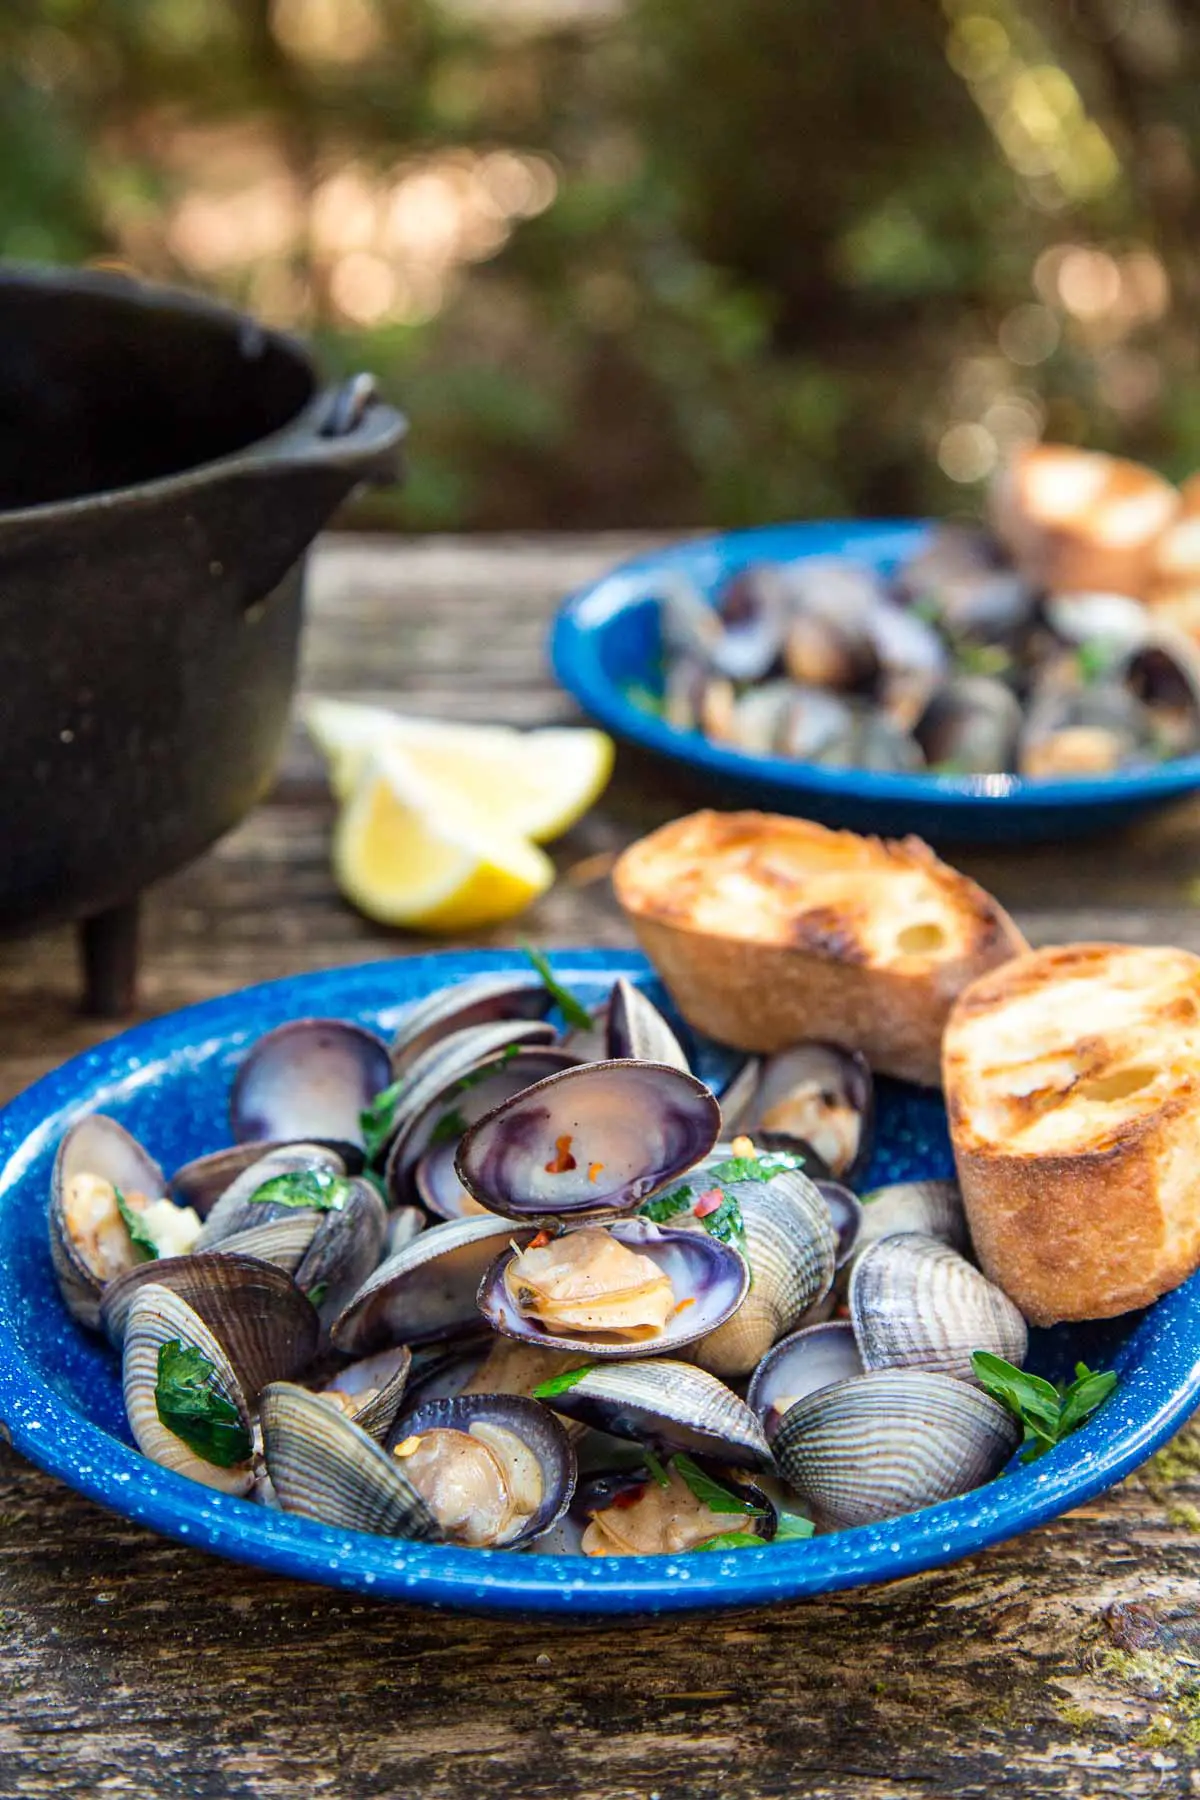 Steamed clams in a blue bowl with grilled bread on the side. A Dutch oven and trees are in the background.